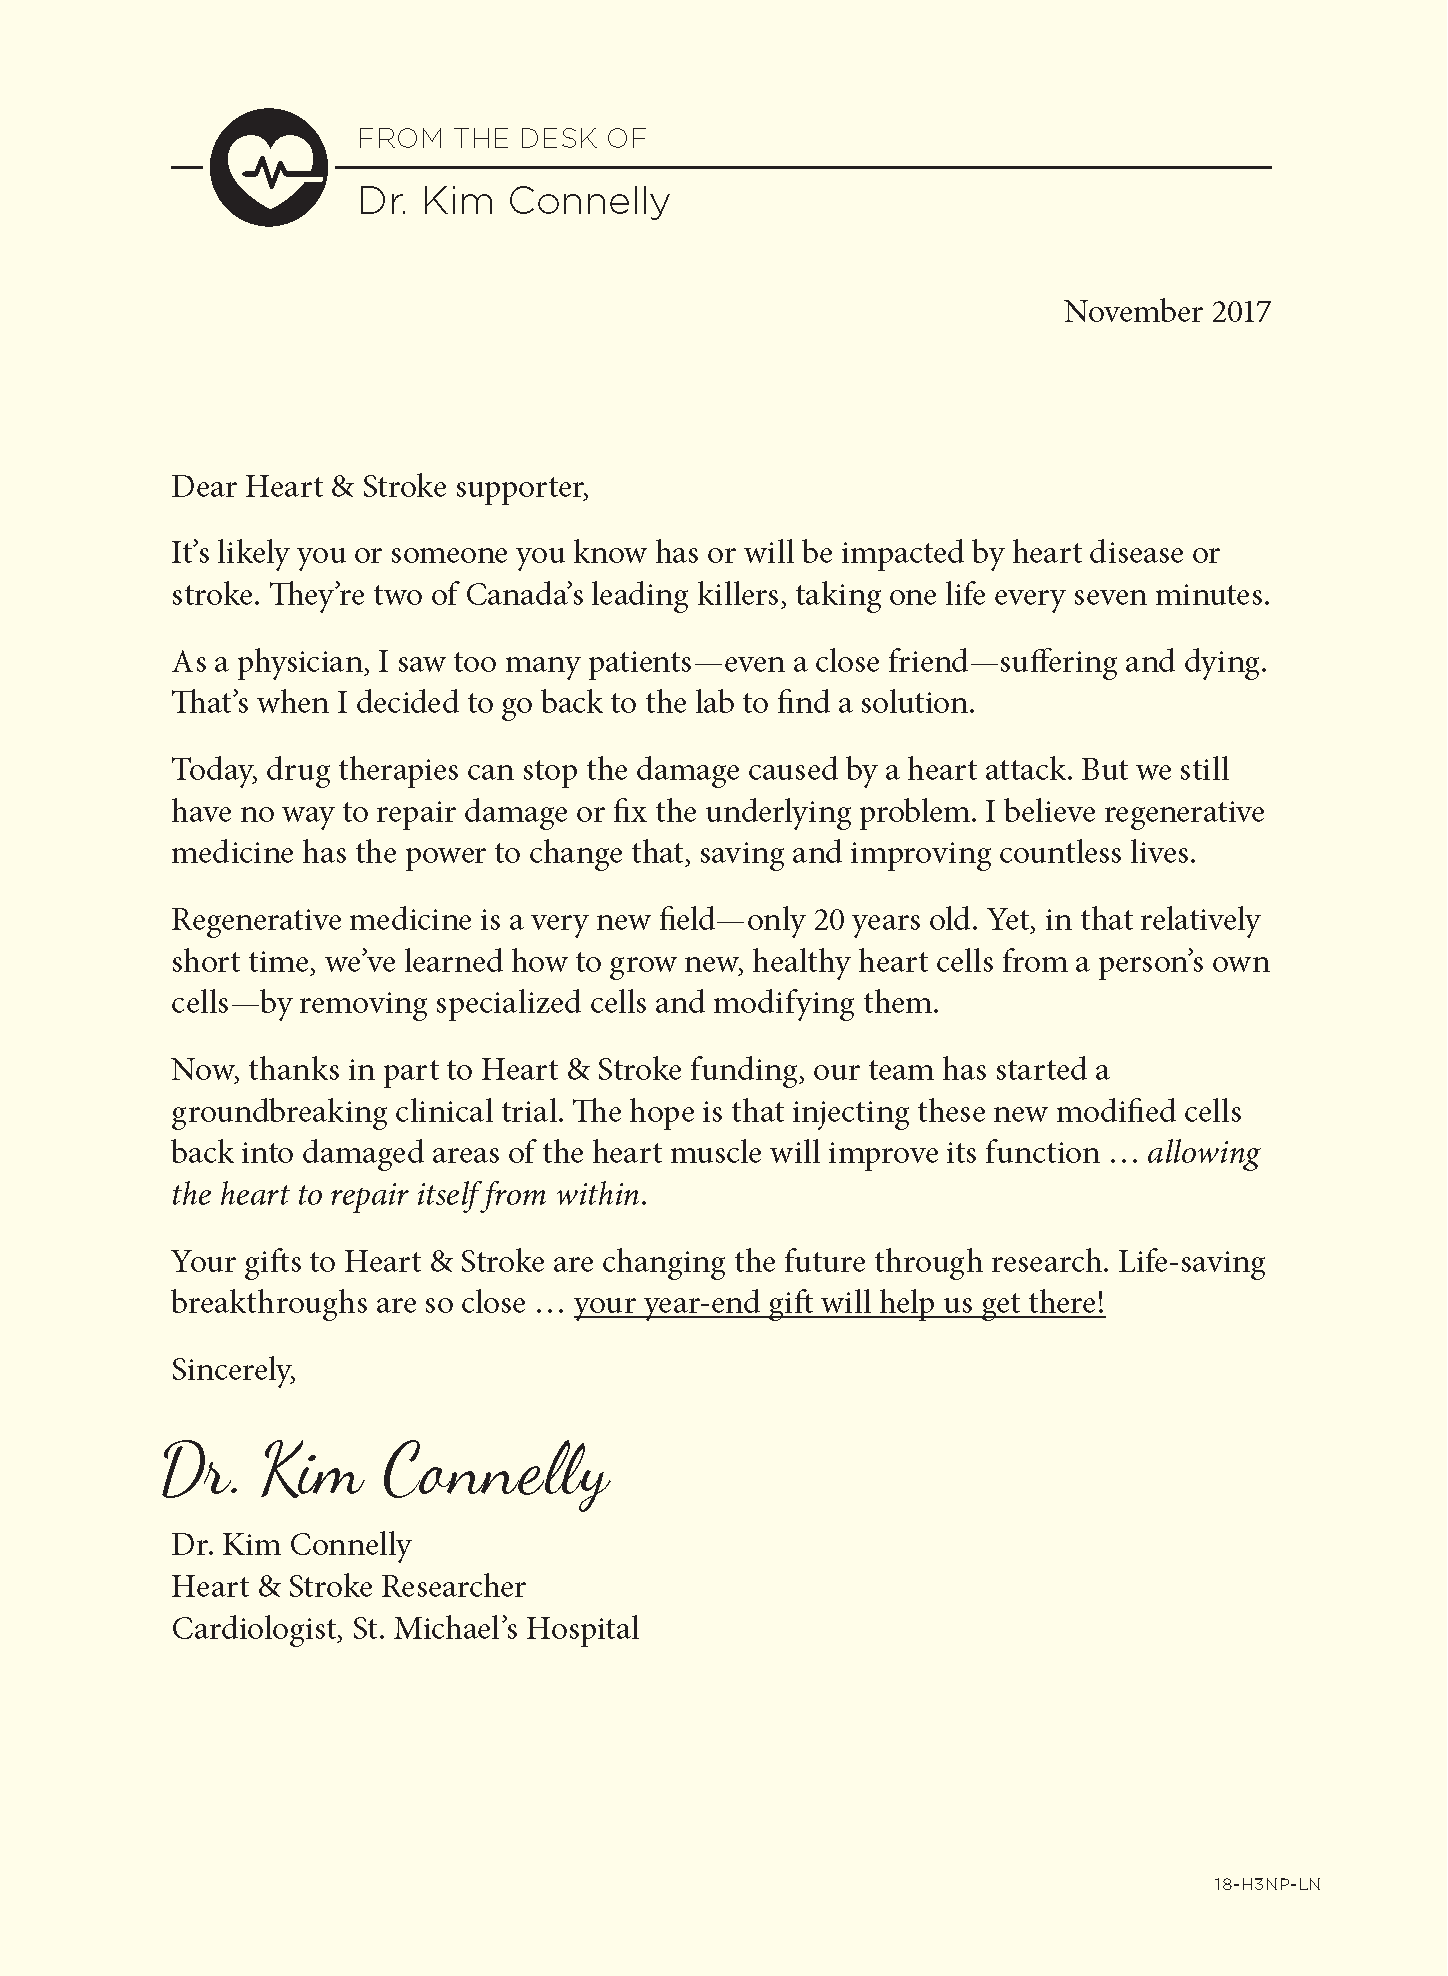 Letter from Dr. Conelly